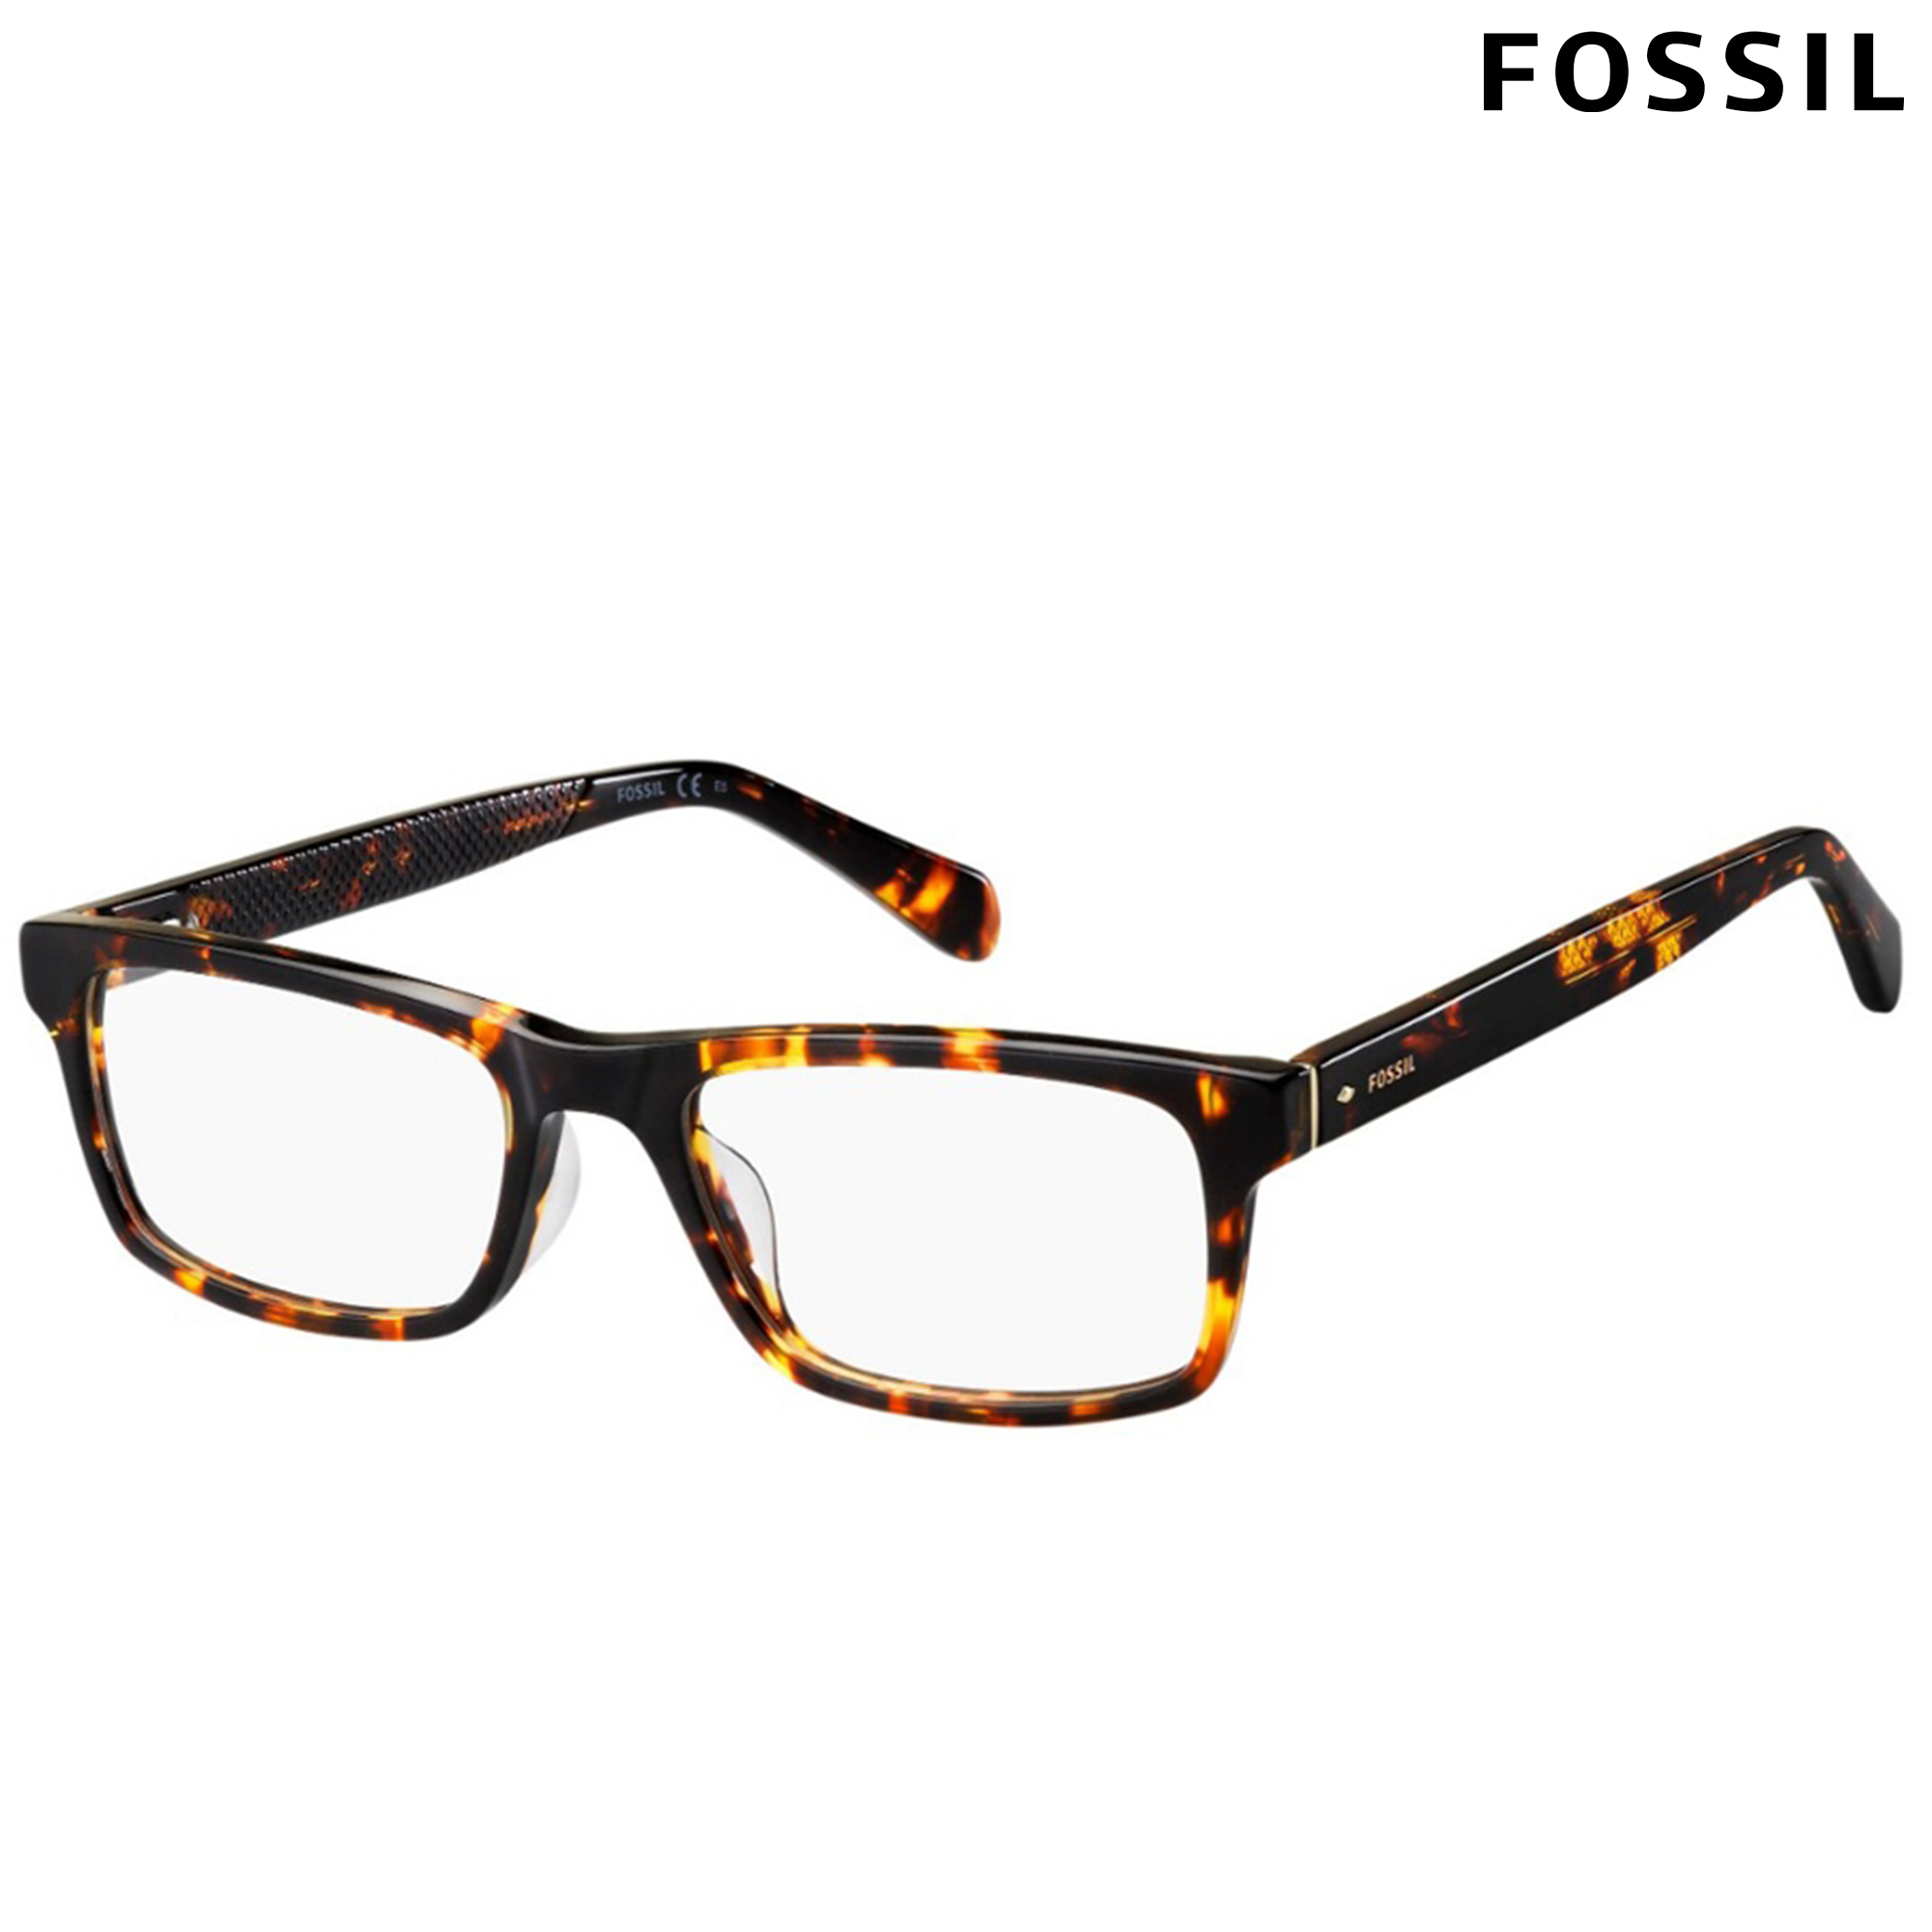 FOSSIL FOS 7061 086 01